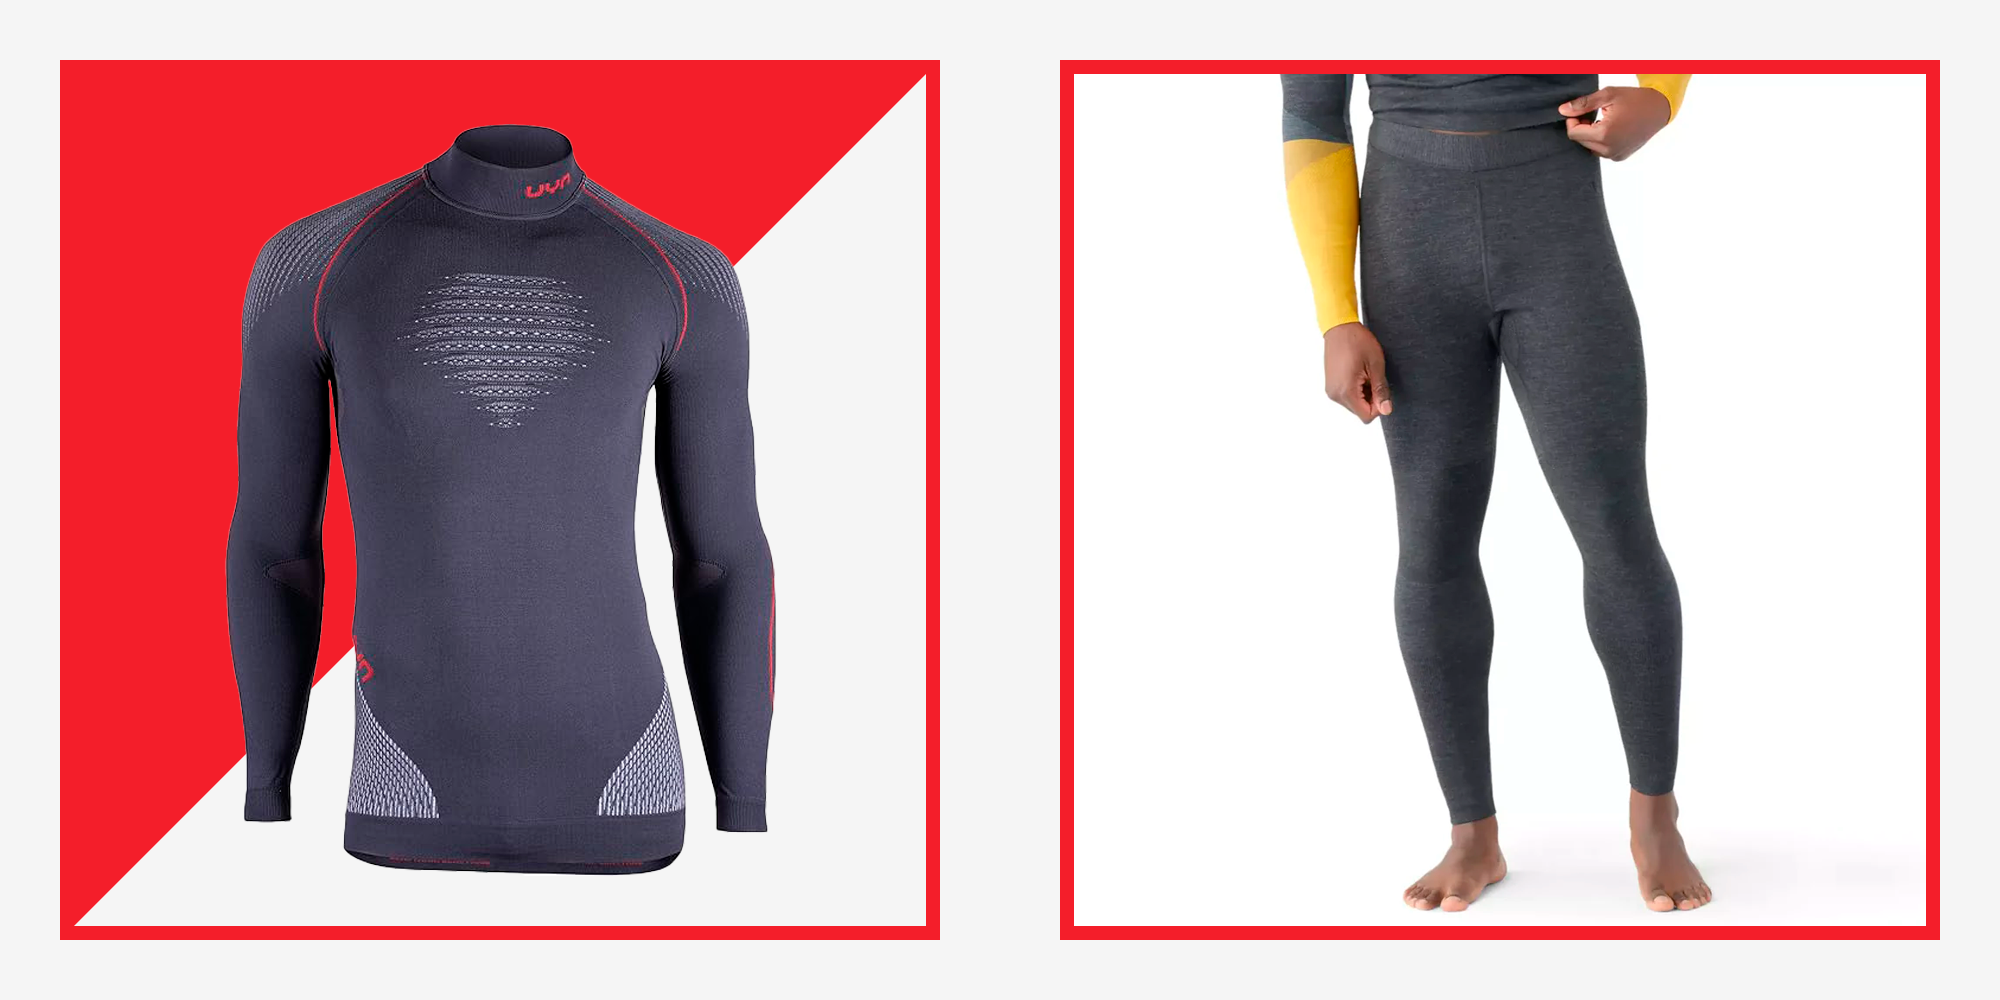 The Base Layer Full-Length Tight